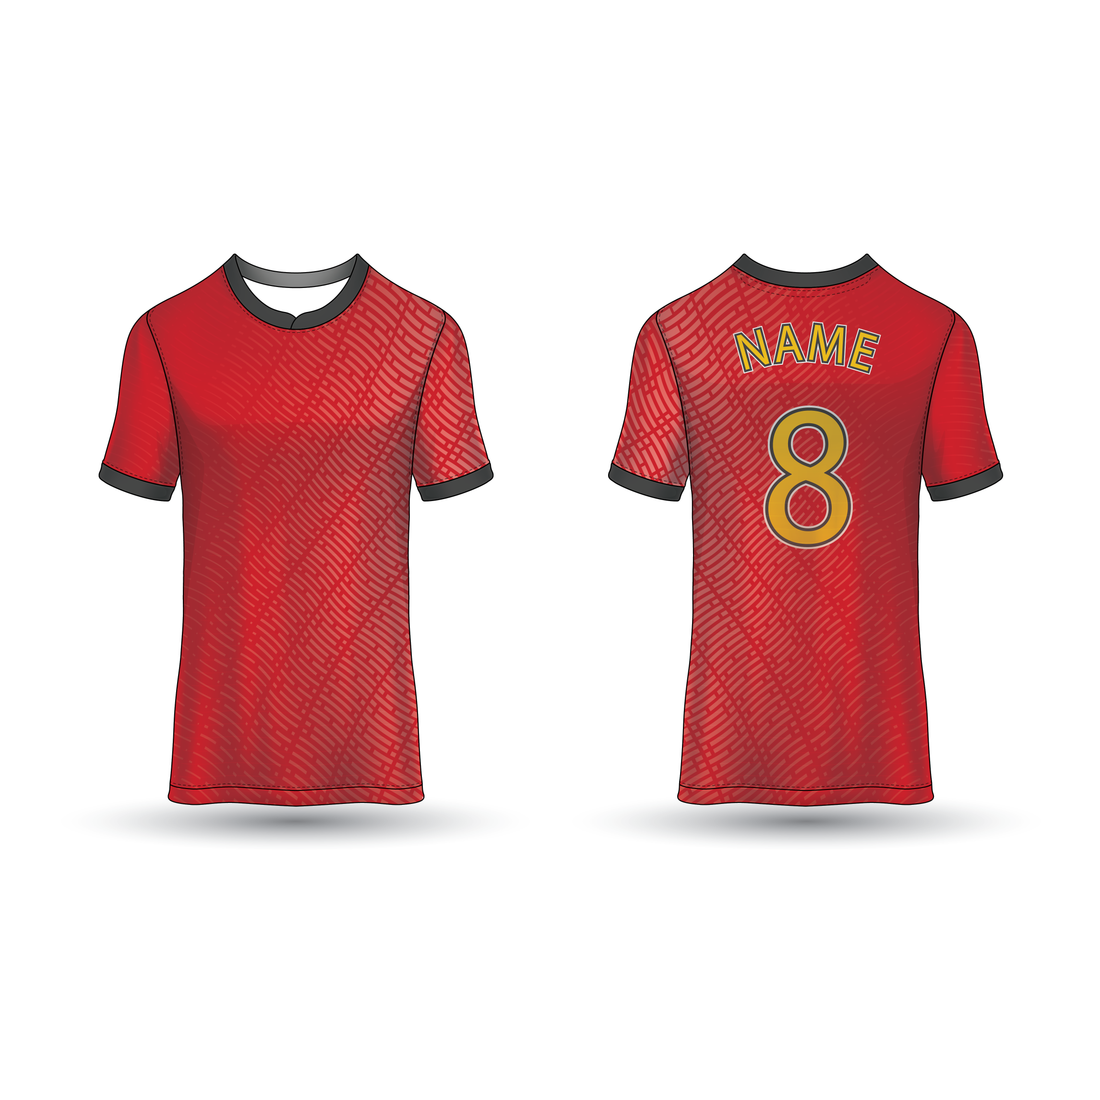 NEXT PRINT All Over Printed Customized Sublimation T-Shirt Unisex Sports Jersey Player Name & Number, Team Name NP50000242